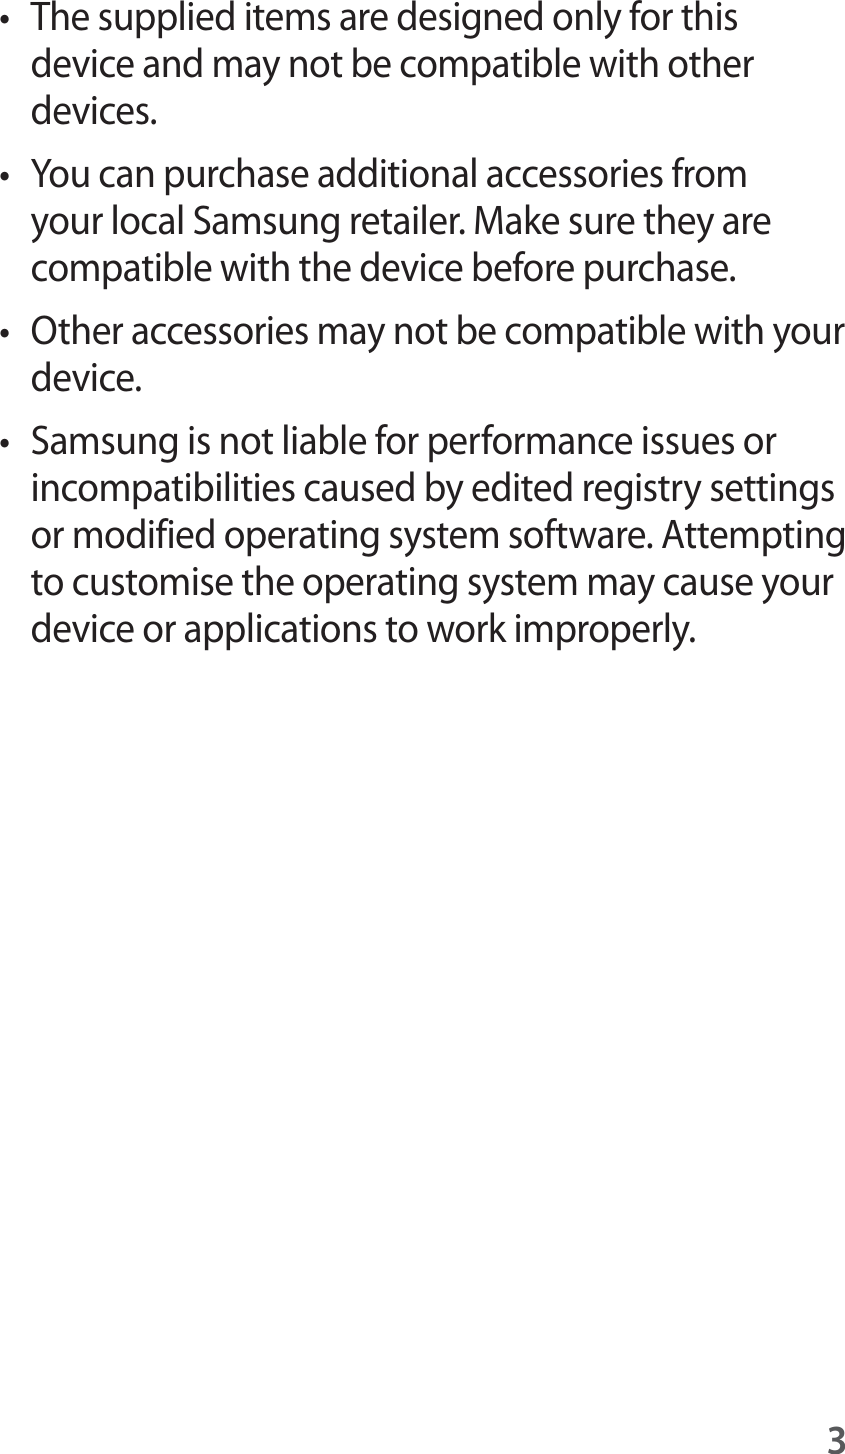 3t The supplied items are designed only for this device and may not be compatible with other devices.t You can purchase additional accessories from your local Samsung retailer. Make sure they are compatible with the device before purchase.t Other accessories may not be compatible with your device.t Samsung is not liable for performance issues or incompatibilities caused by edited registry settings or modified operating system software. Attempting to customise the operating system may cause your device or applications to work improperly.